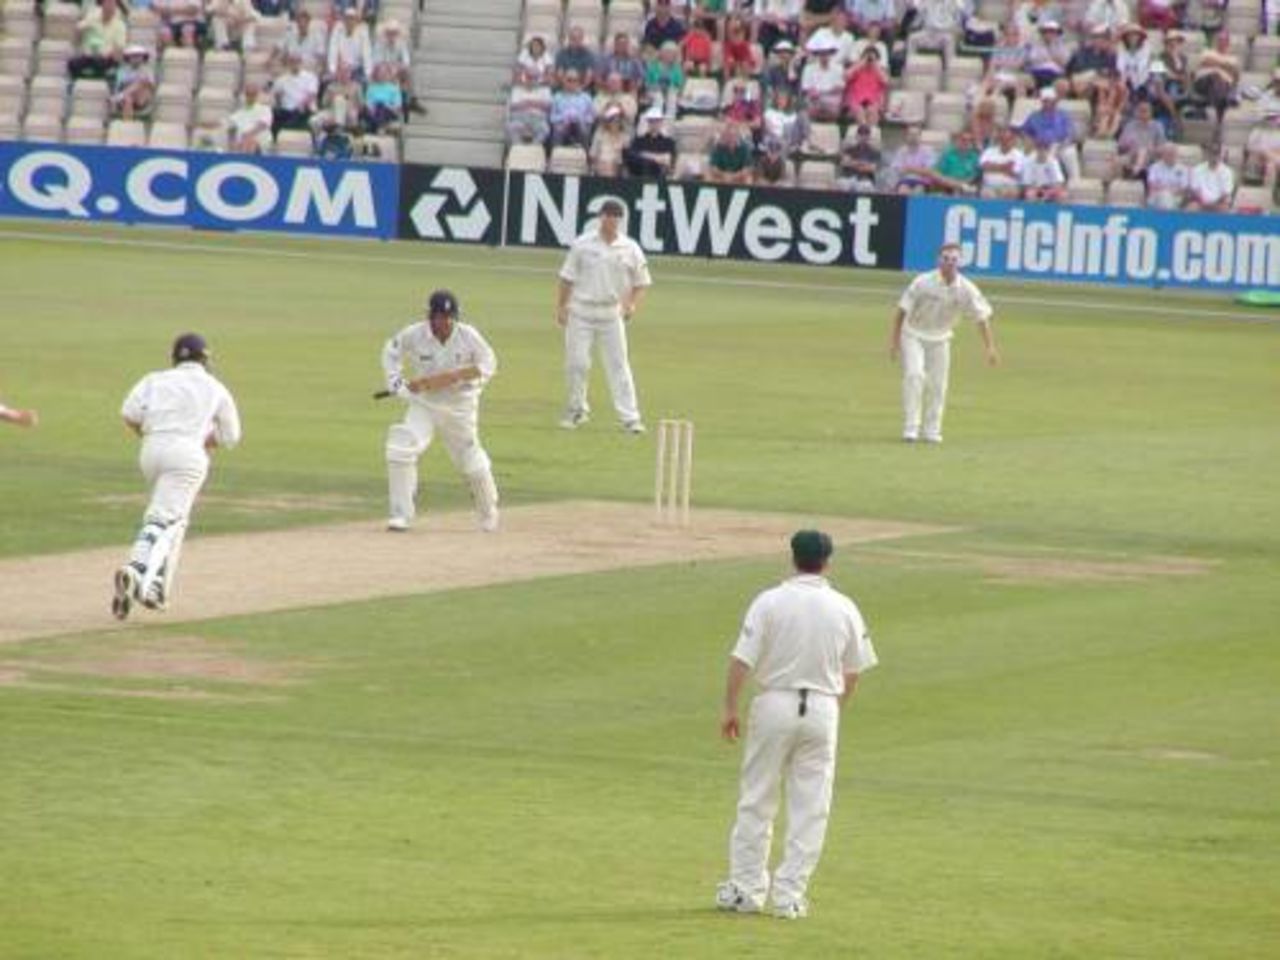 Robin Smith sets off to complete his century against the Australians